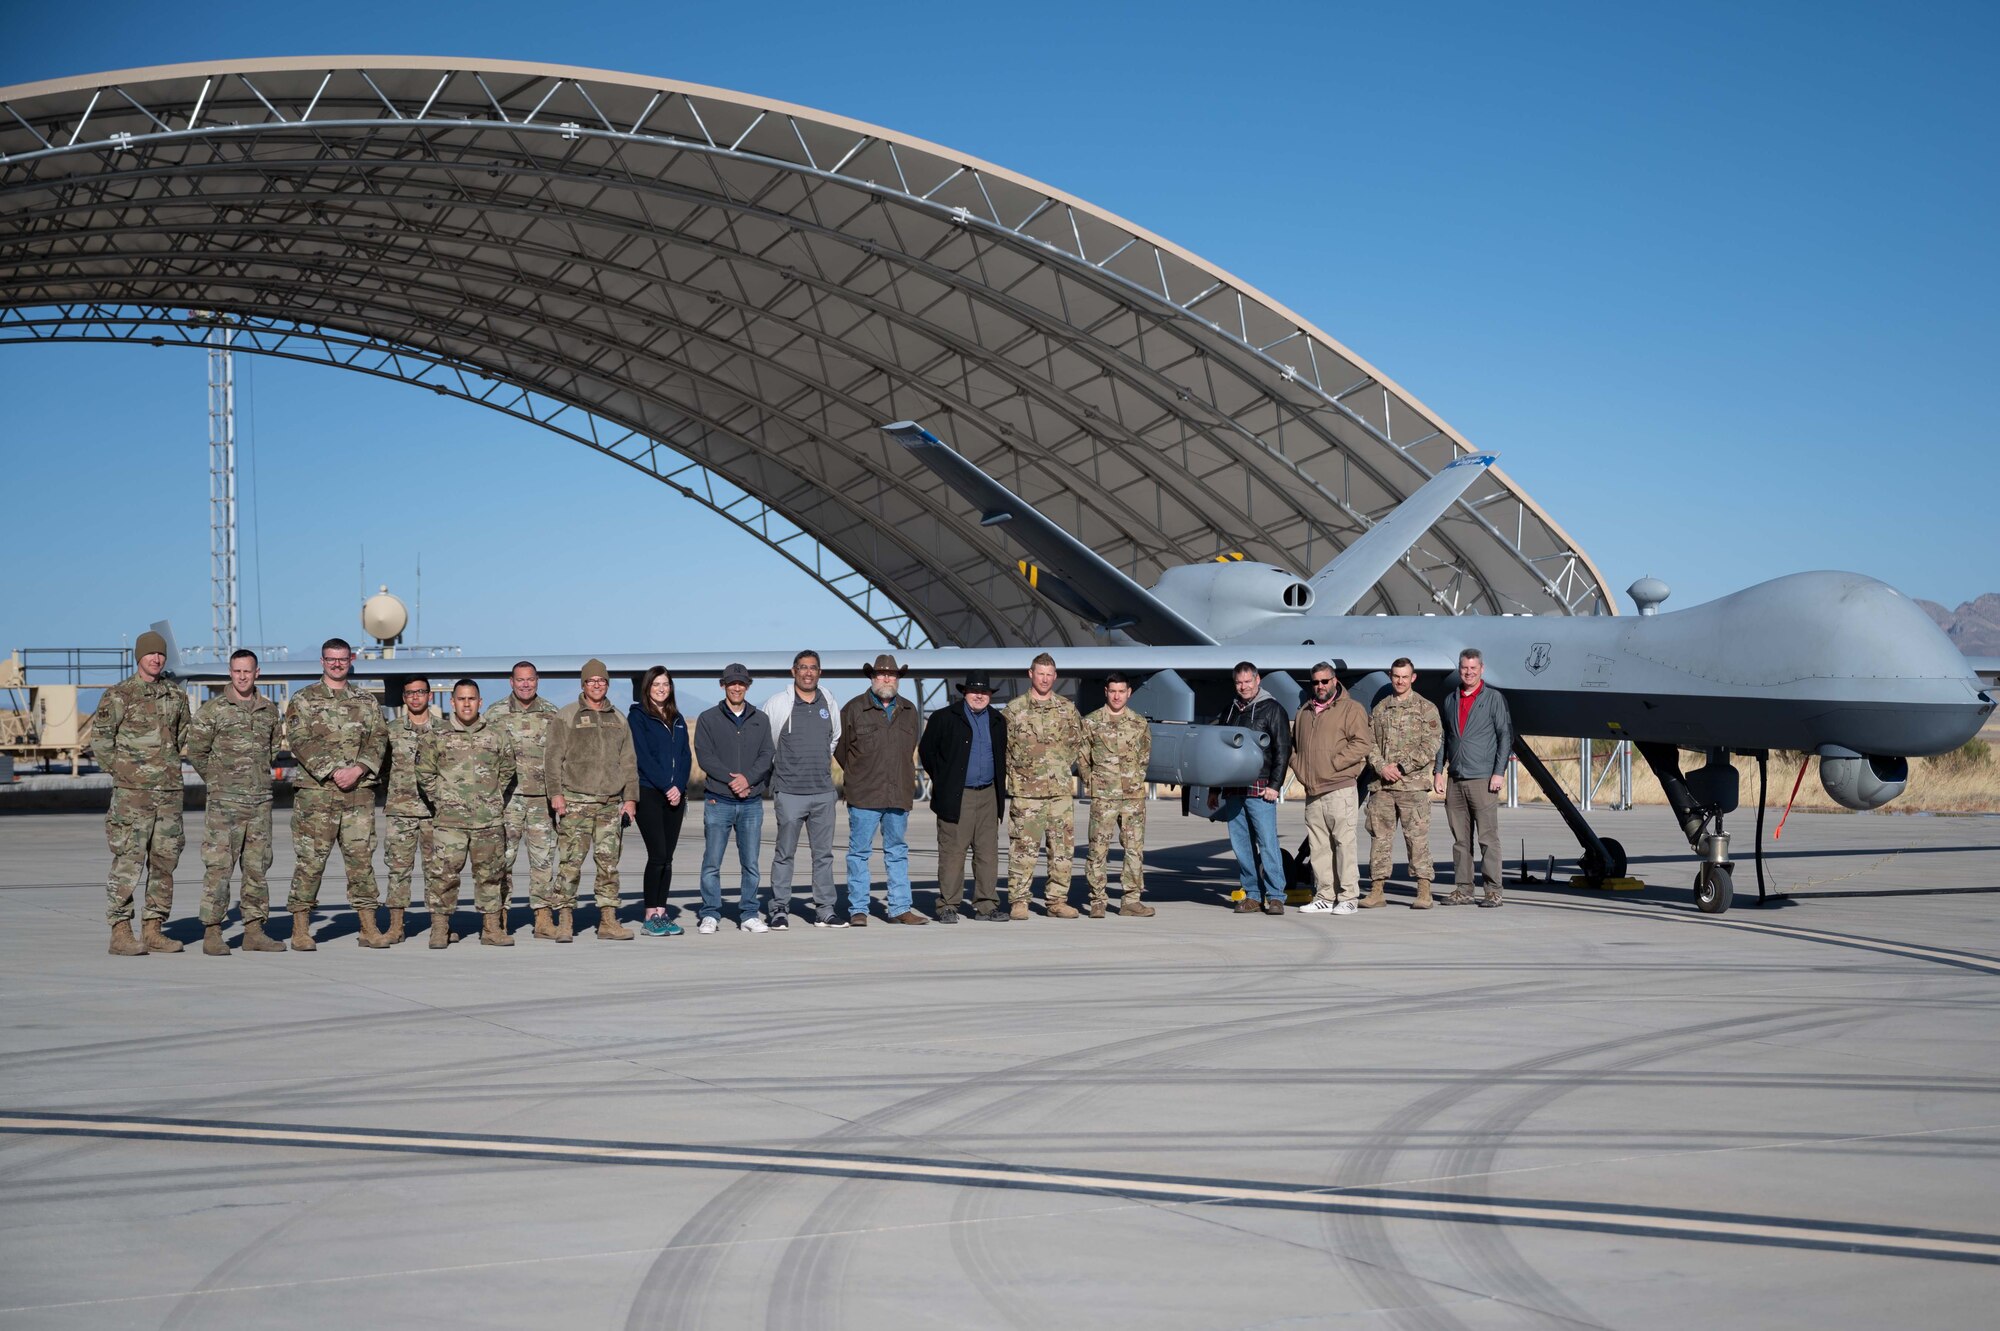 Airmen assigned to the 214 LRE at U.S. Army Ft. Huachuca, Arizona, AATC in Tucson, Arizona, and several contractors and support personnel pose with an MQ-9 Reaper with the REAP 2.0 payload prior to an operational assessment flight on March 11.